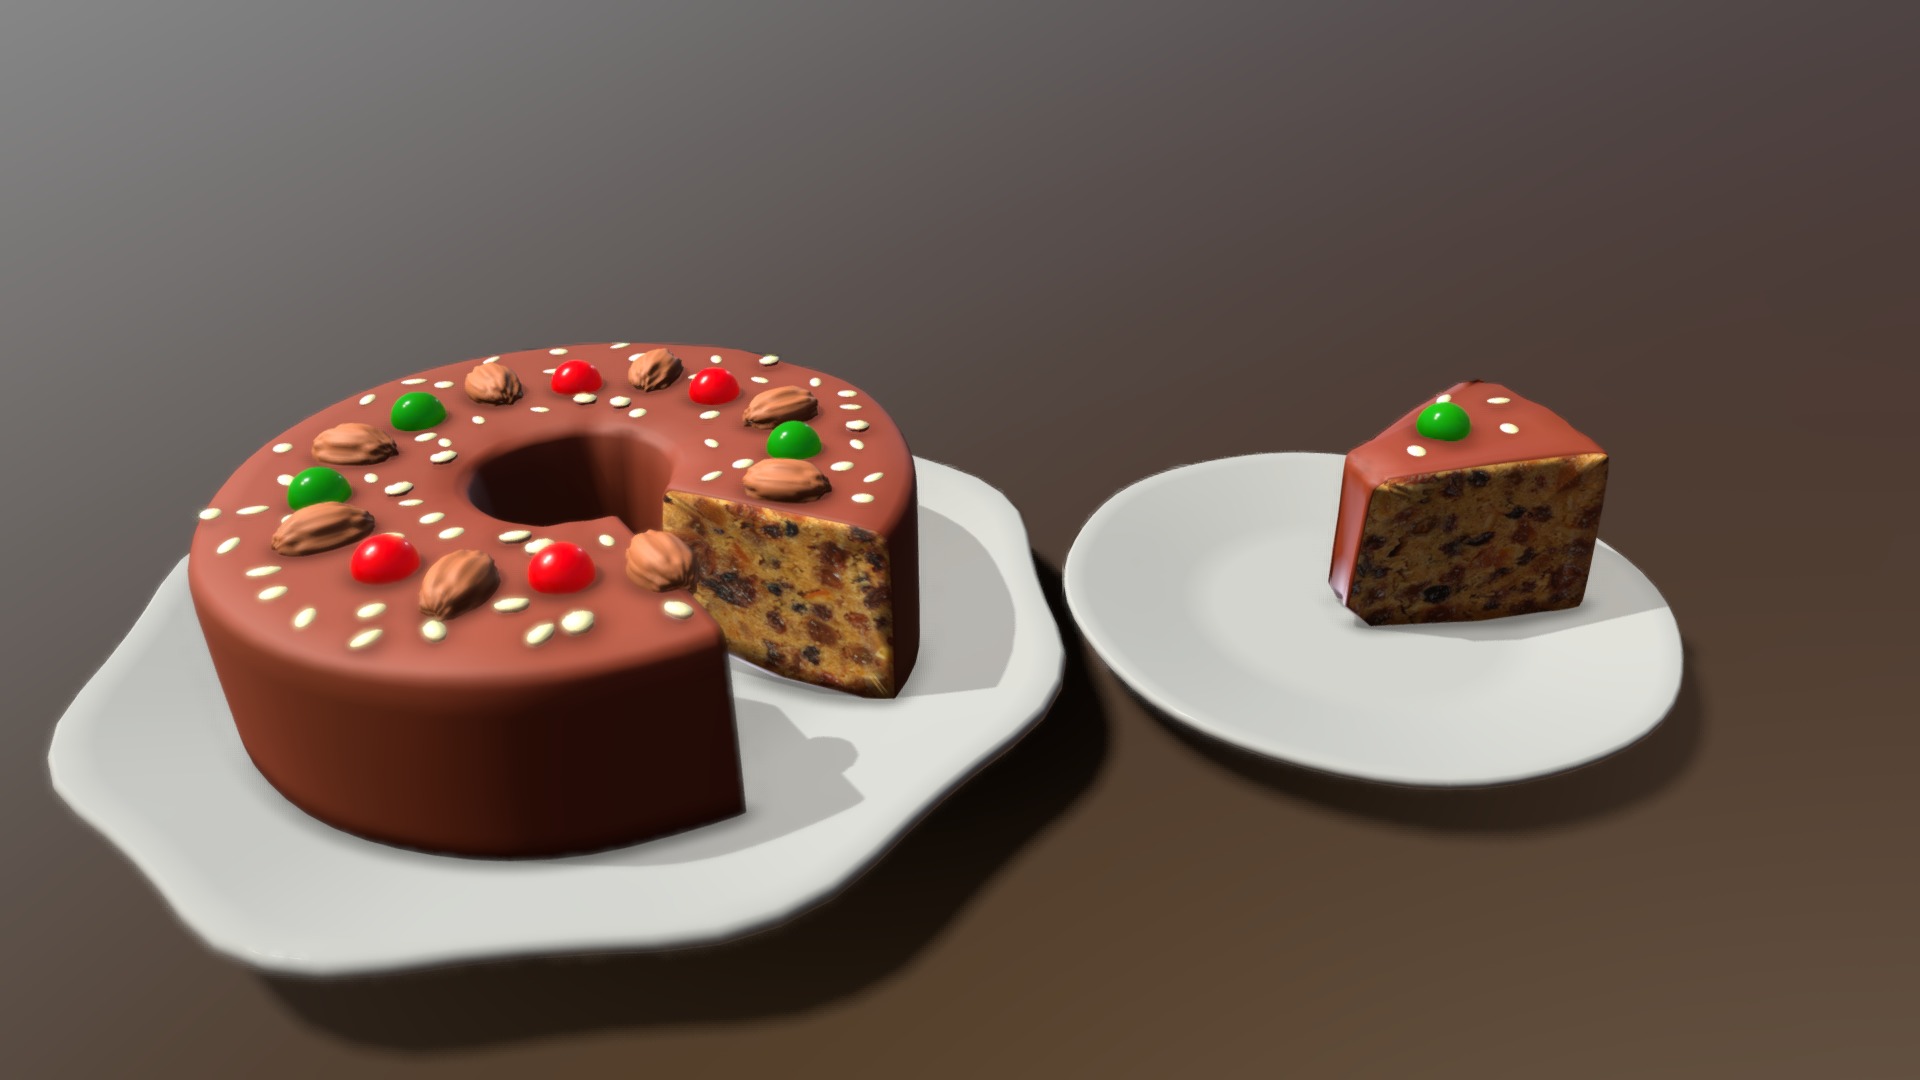 3D model 6th Dec Fruitcake - This is a 3D model of the 6th Dec Fruitcake. The 3D model is about a couple of plates with food on them.